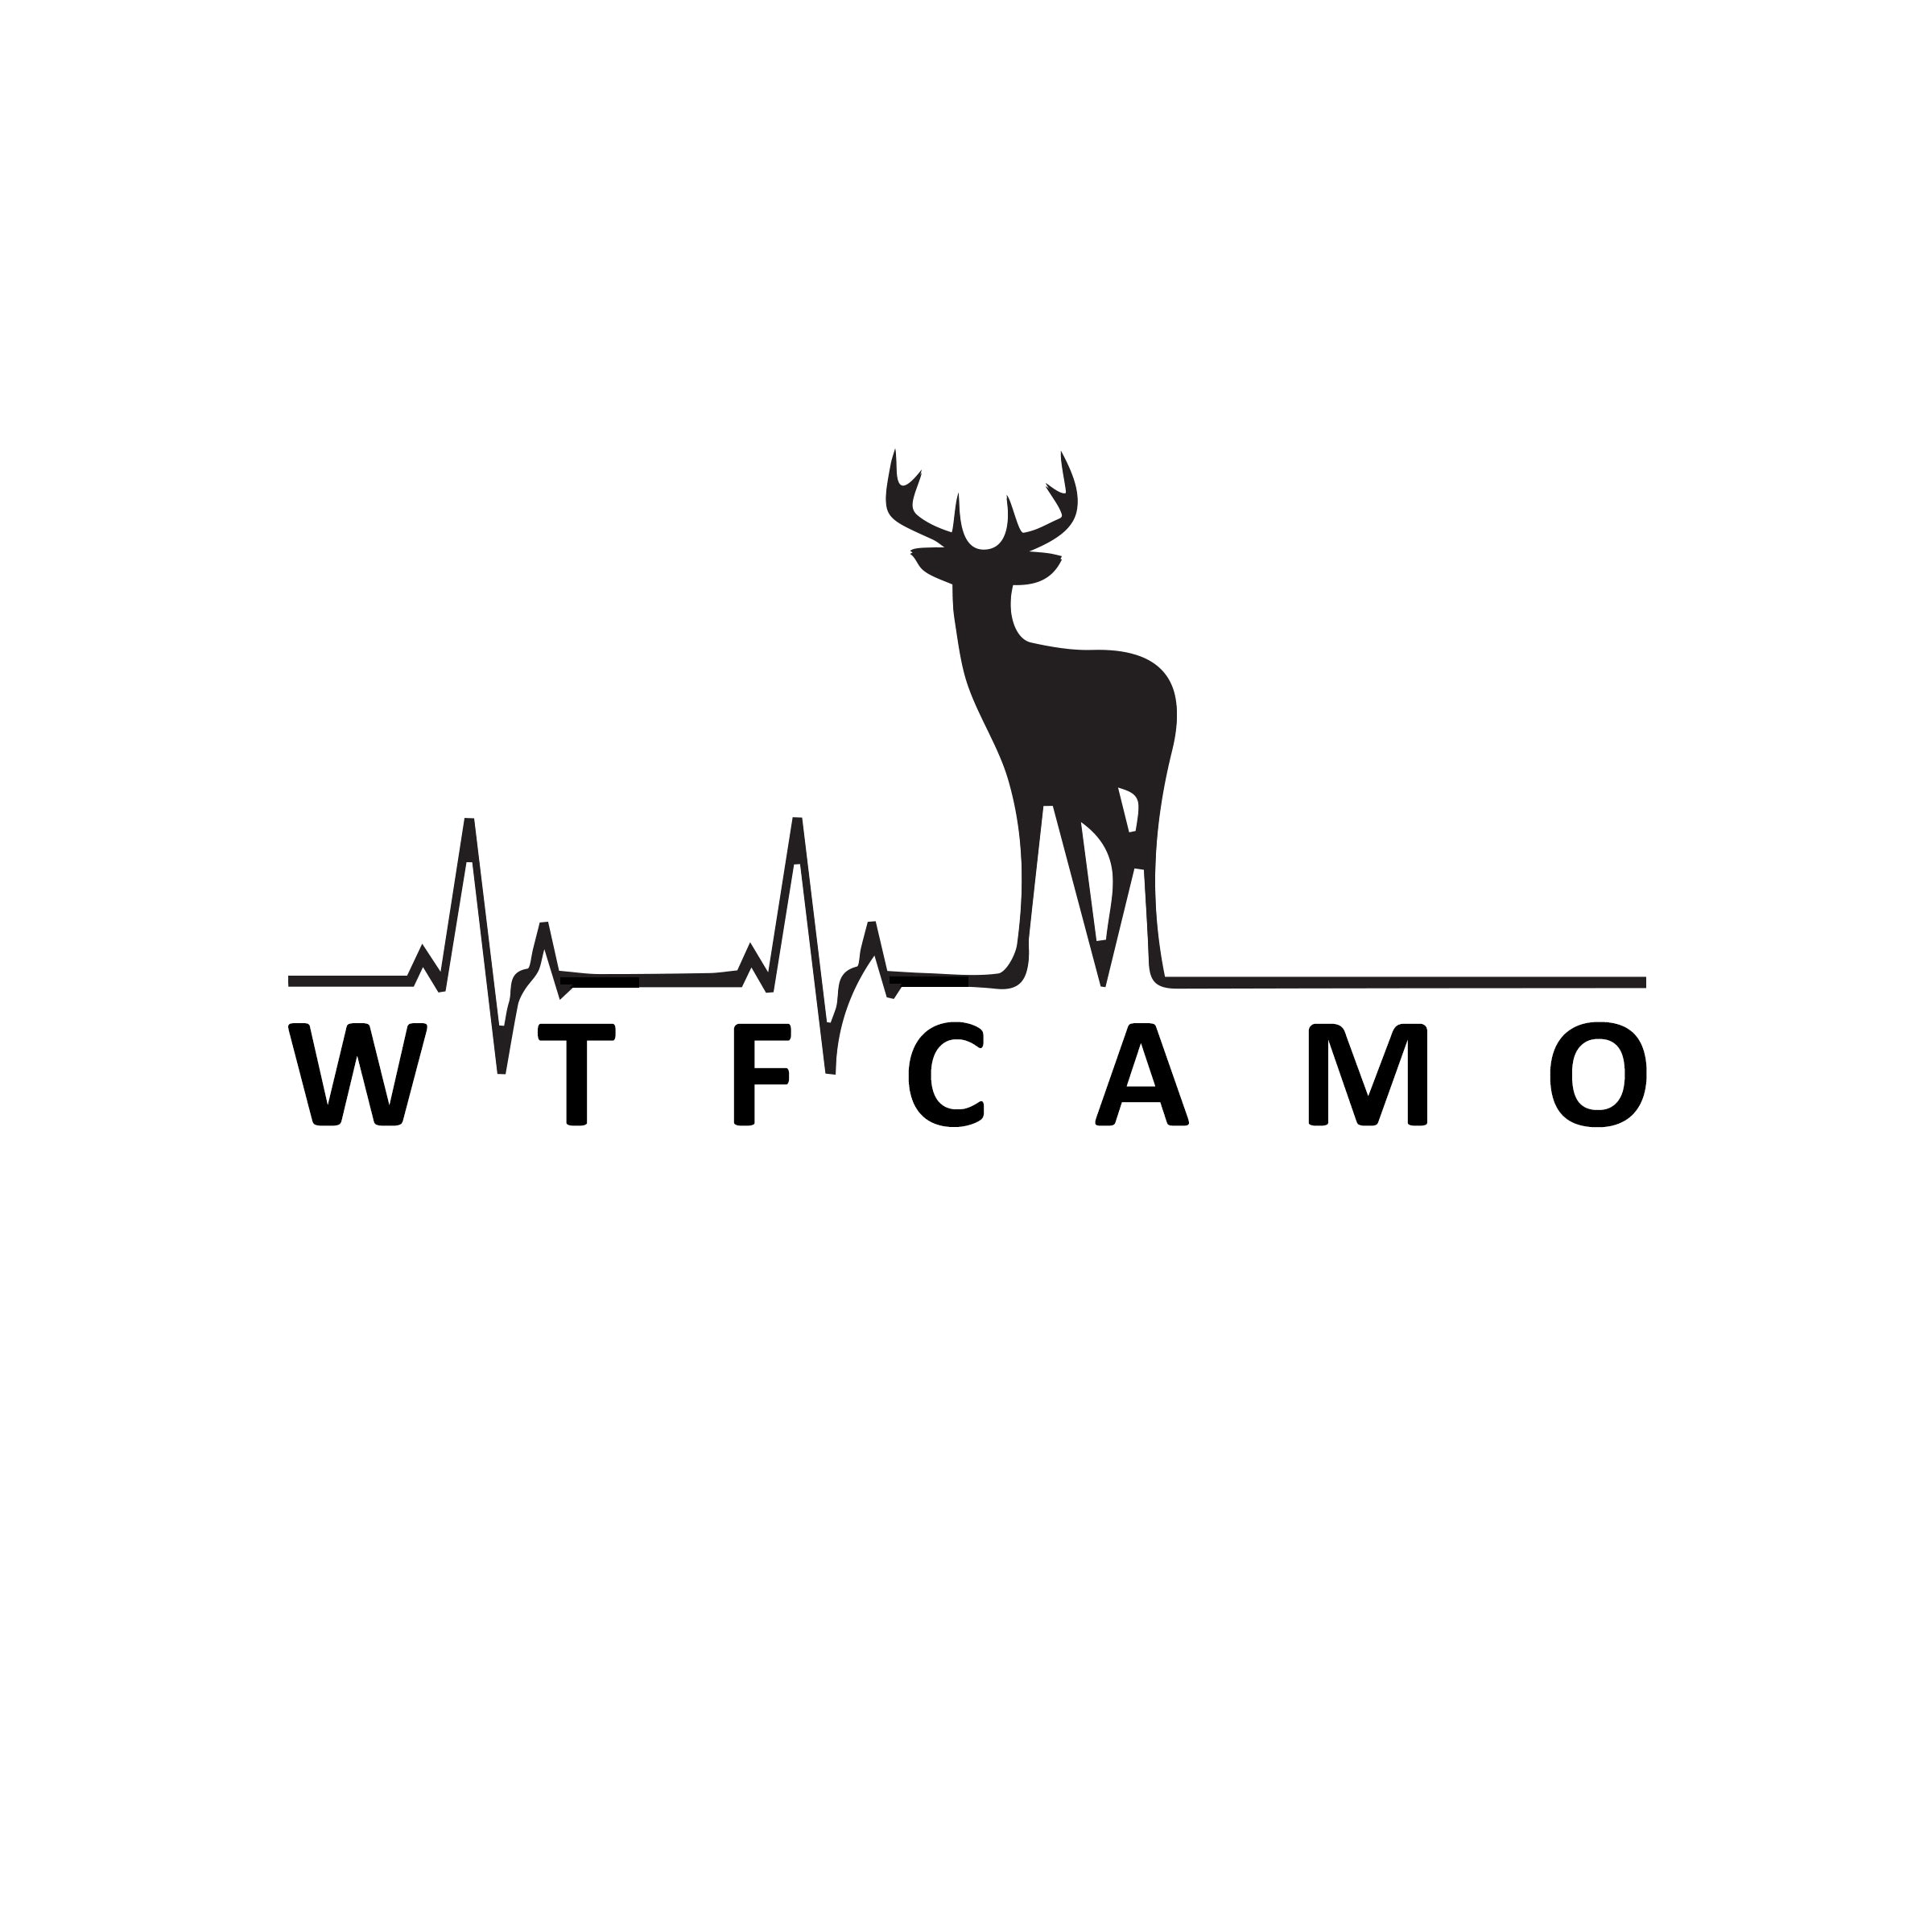 ALL WTFCAMO PRODUCTS